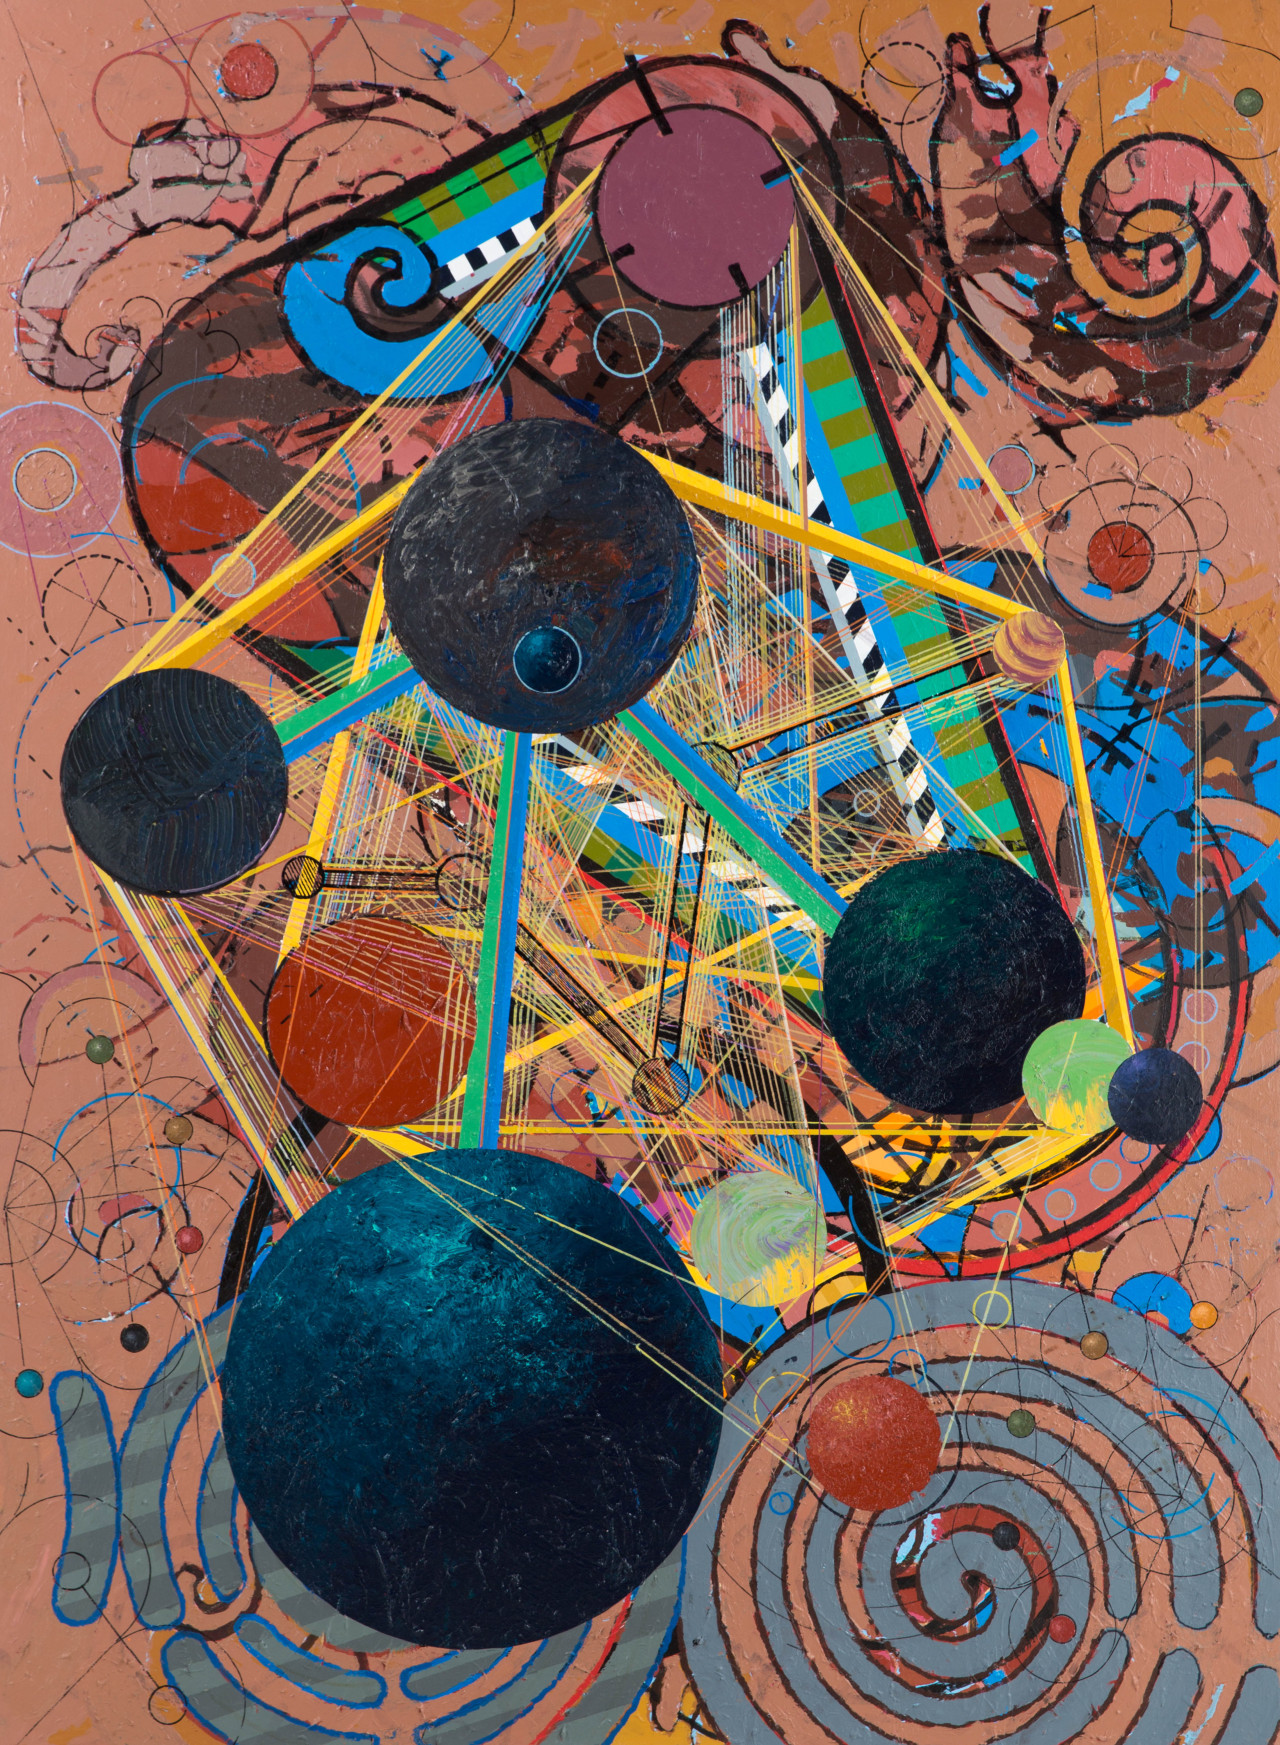 Robert Reed (1938-2014) — Galactic Journal “Ginger Snap” [acrylic and oil marker on canvas, 1999]